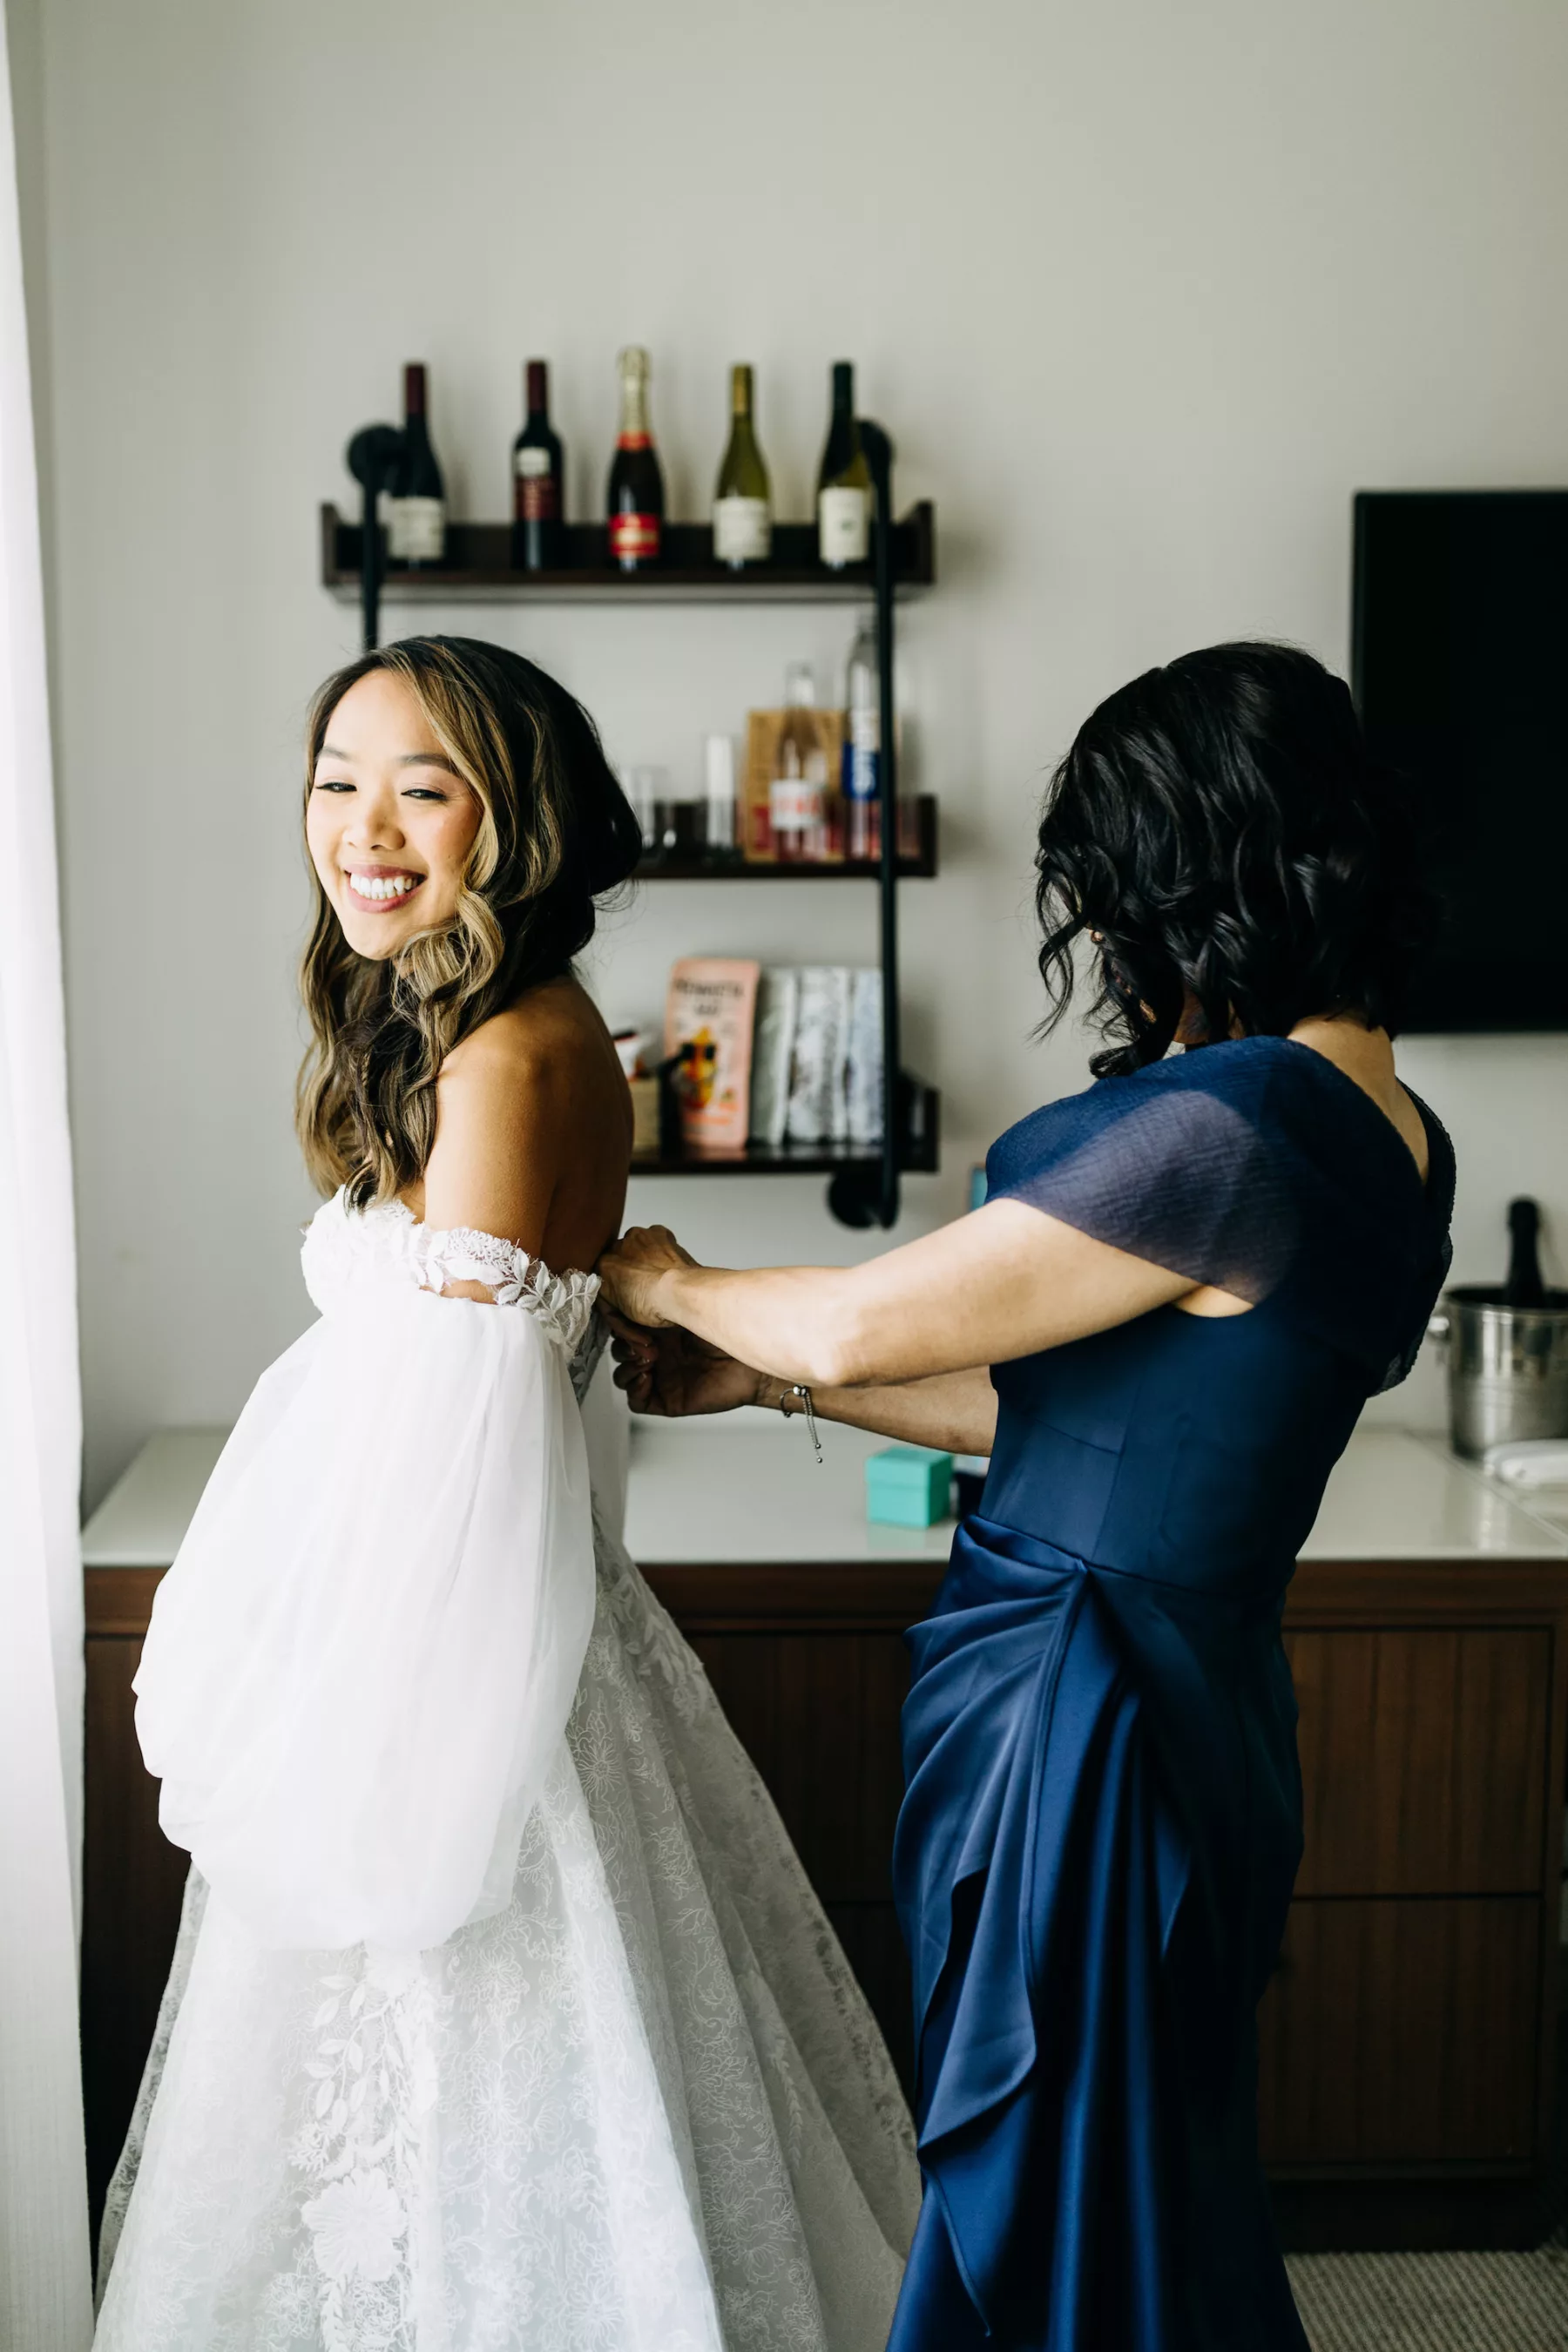 Bride Getting Ready Wedding Portrait | White Lace Off The Shoulder A Line Wedding Dress with Removable Puff Sleeves Ideas | Elegant Bridal Curls, Natural Inspired Makeup | Tampa Bay Hair and Makeup Artist Femme Akoi Beauty Studio | Photographer Amber McWhorter Photography